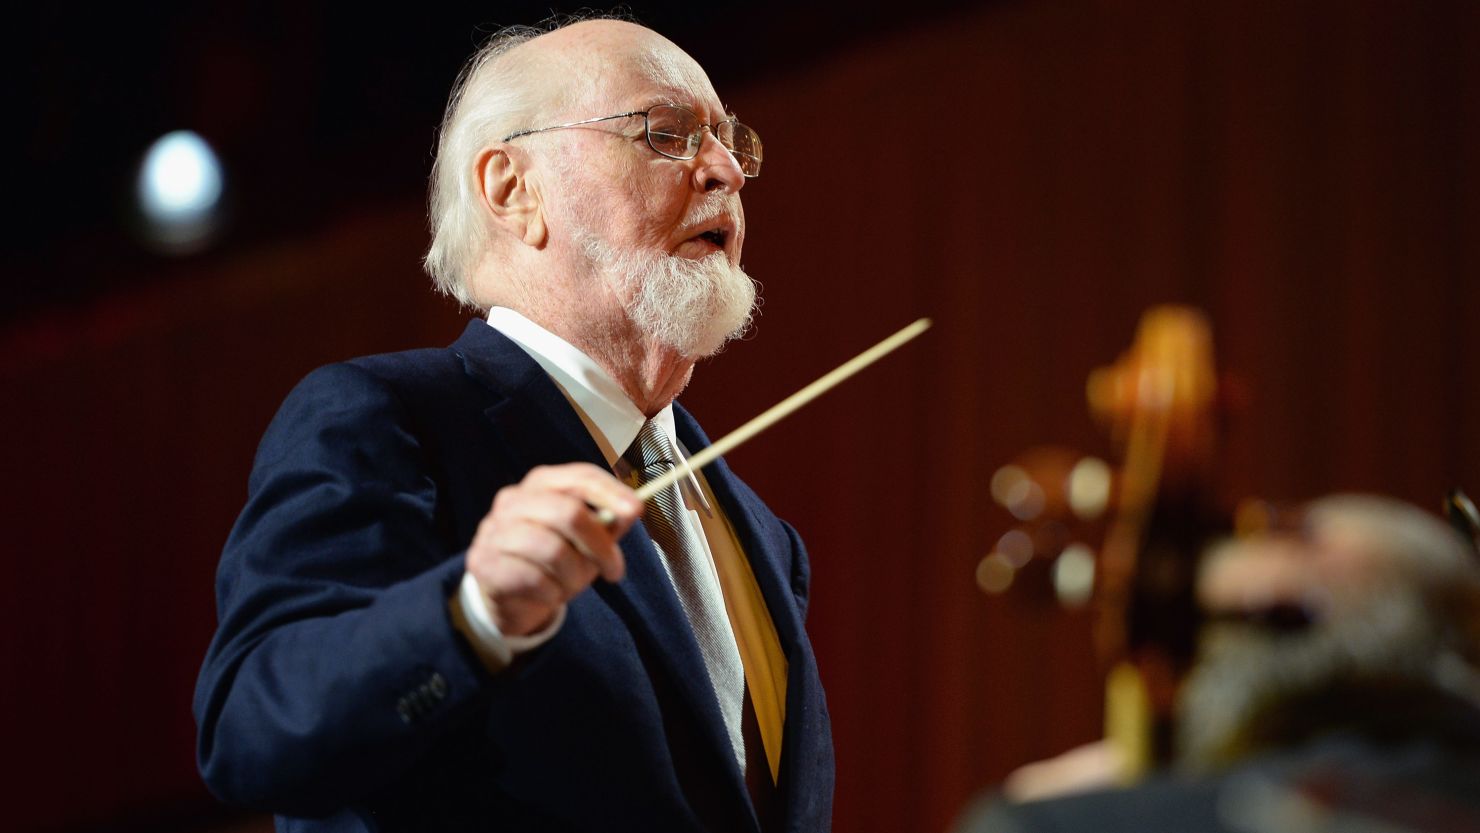 Composer John Williams, seen here performing on stage in December 2016 in Hollywood, California, spoke with CNN's Chris Wallace about rumors of his retirement. 